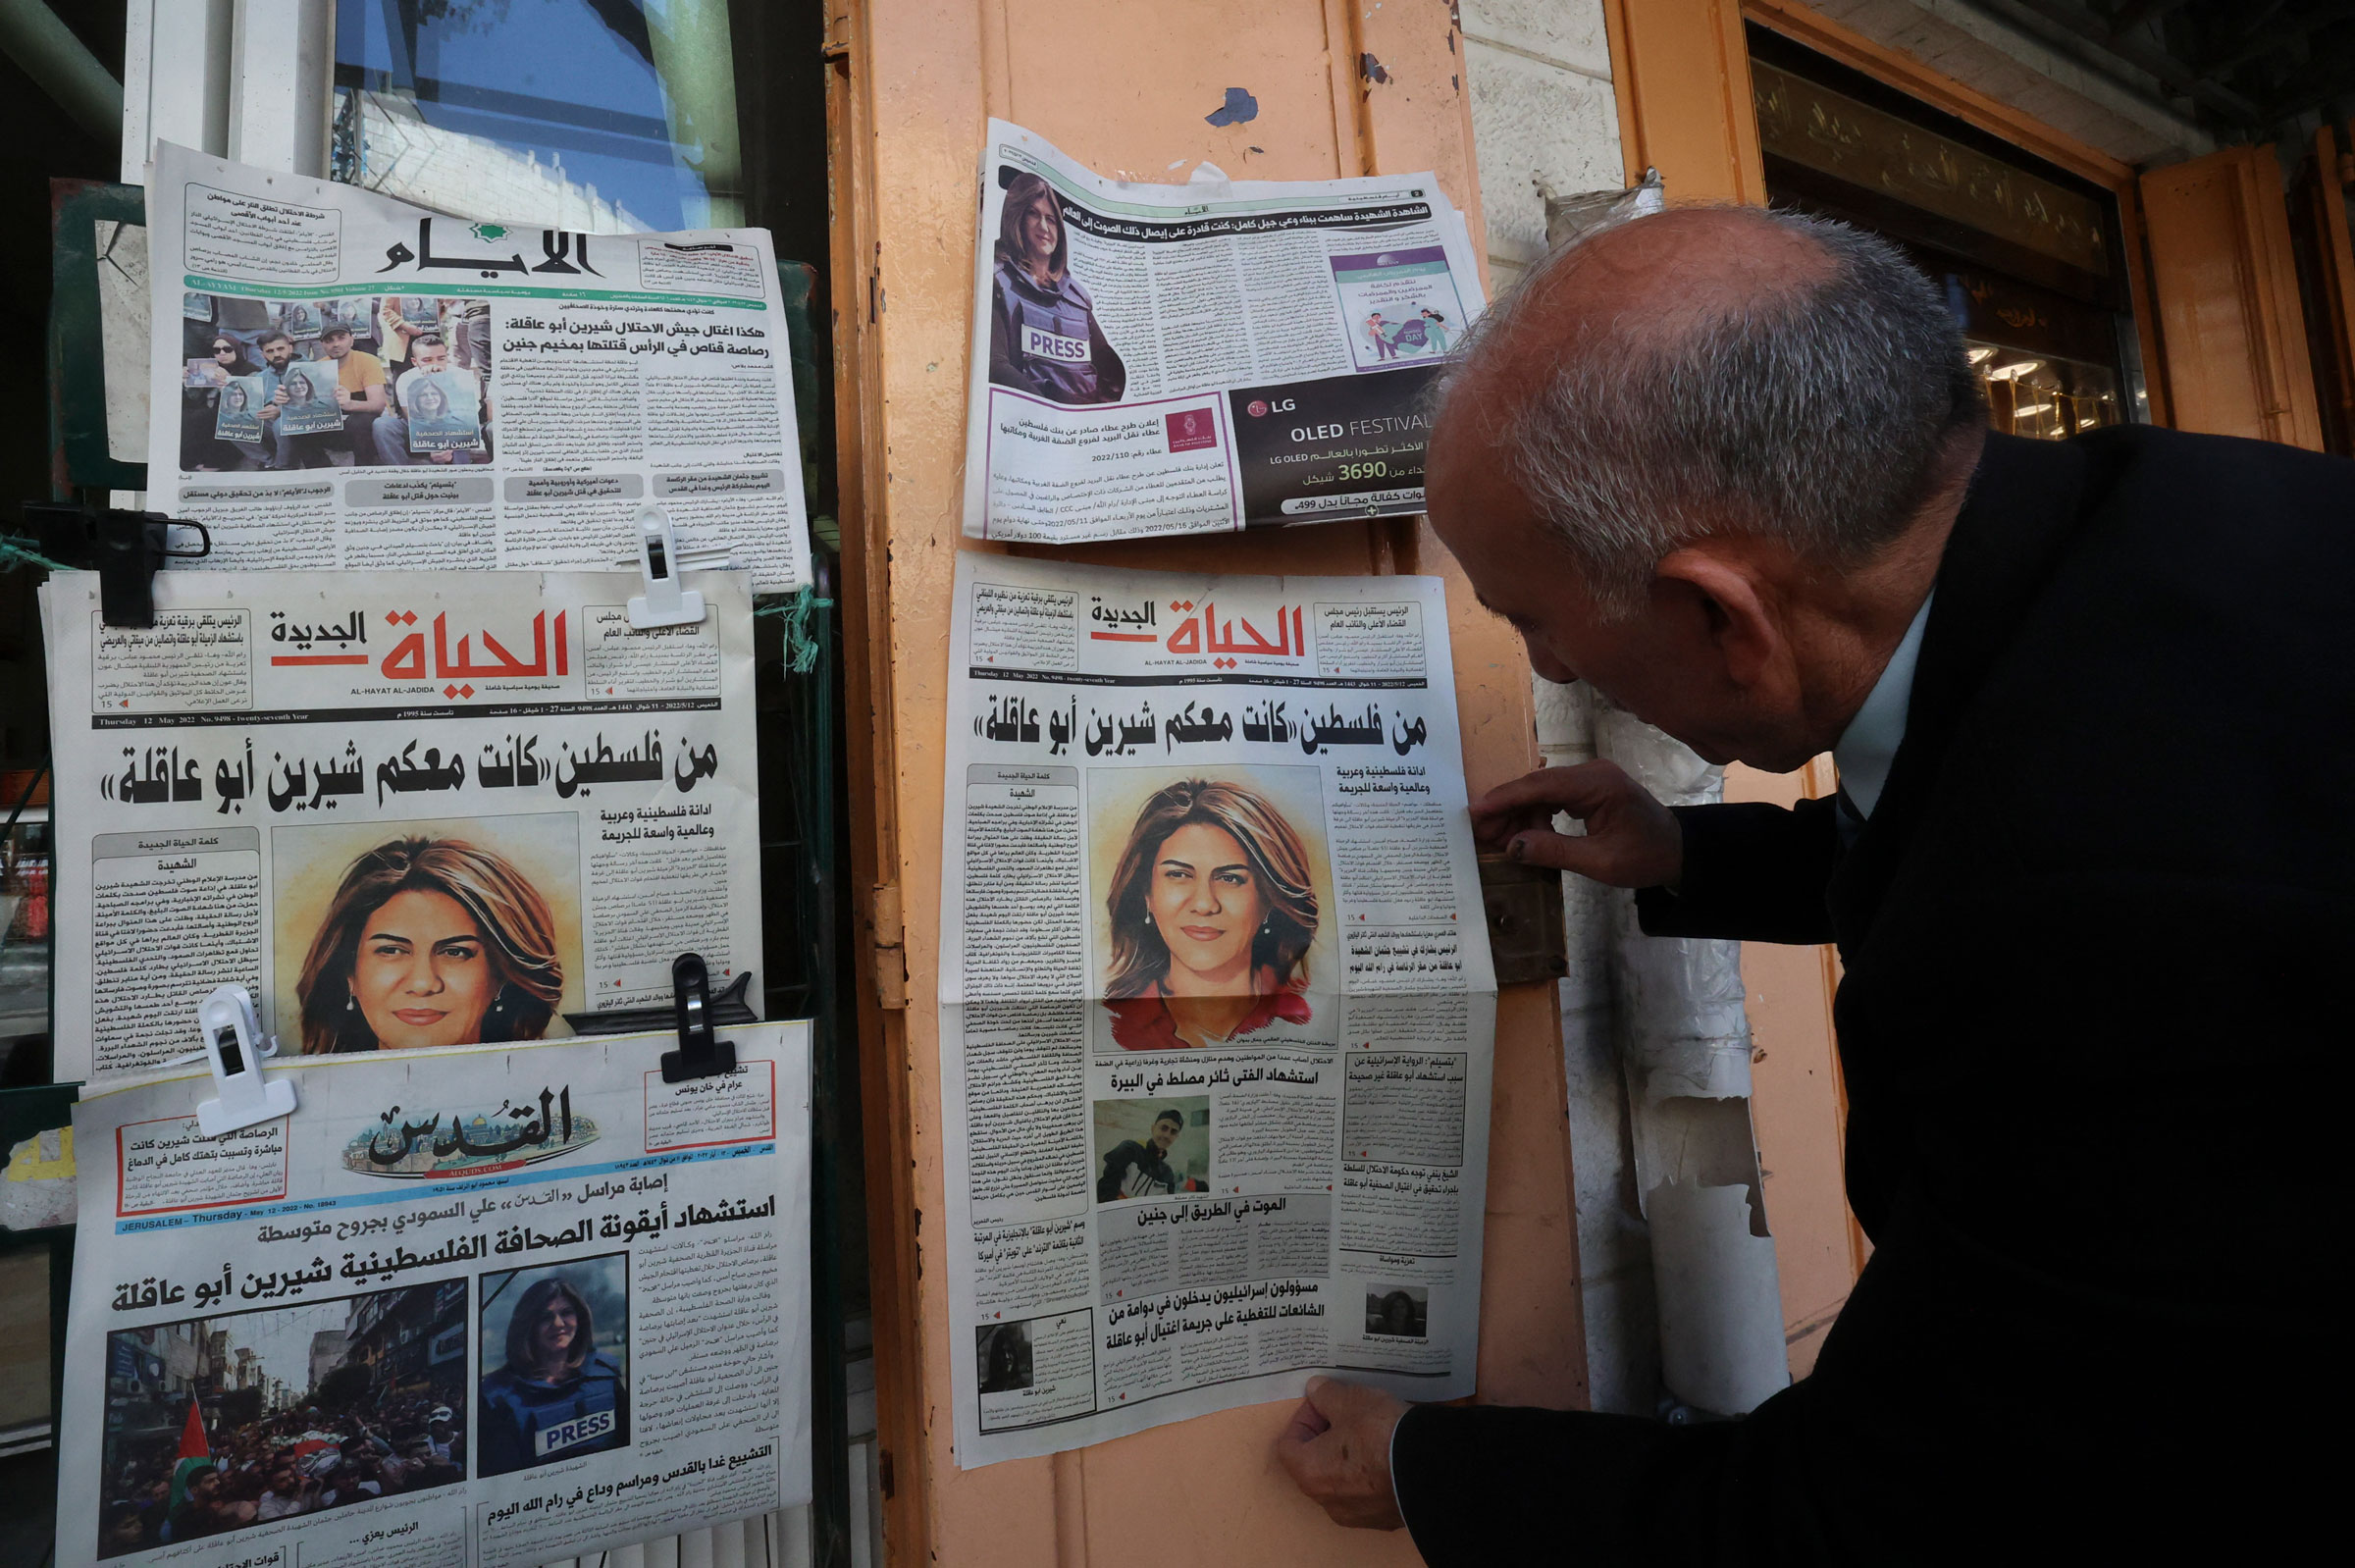 A Palestinian man looks at the front pages of local newspapers reporting on the death of veteran Al Jazeera journalist Shireen Abu Akleh, who was shot dead while covering an Israeli army raid in Jenin, West Bank, on May 12, 2022. (Hazem Bader—AFP/Getty Images)